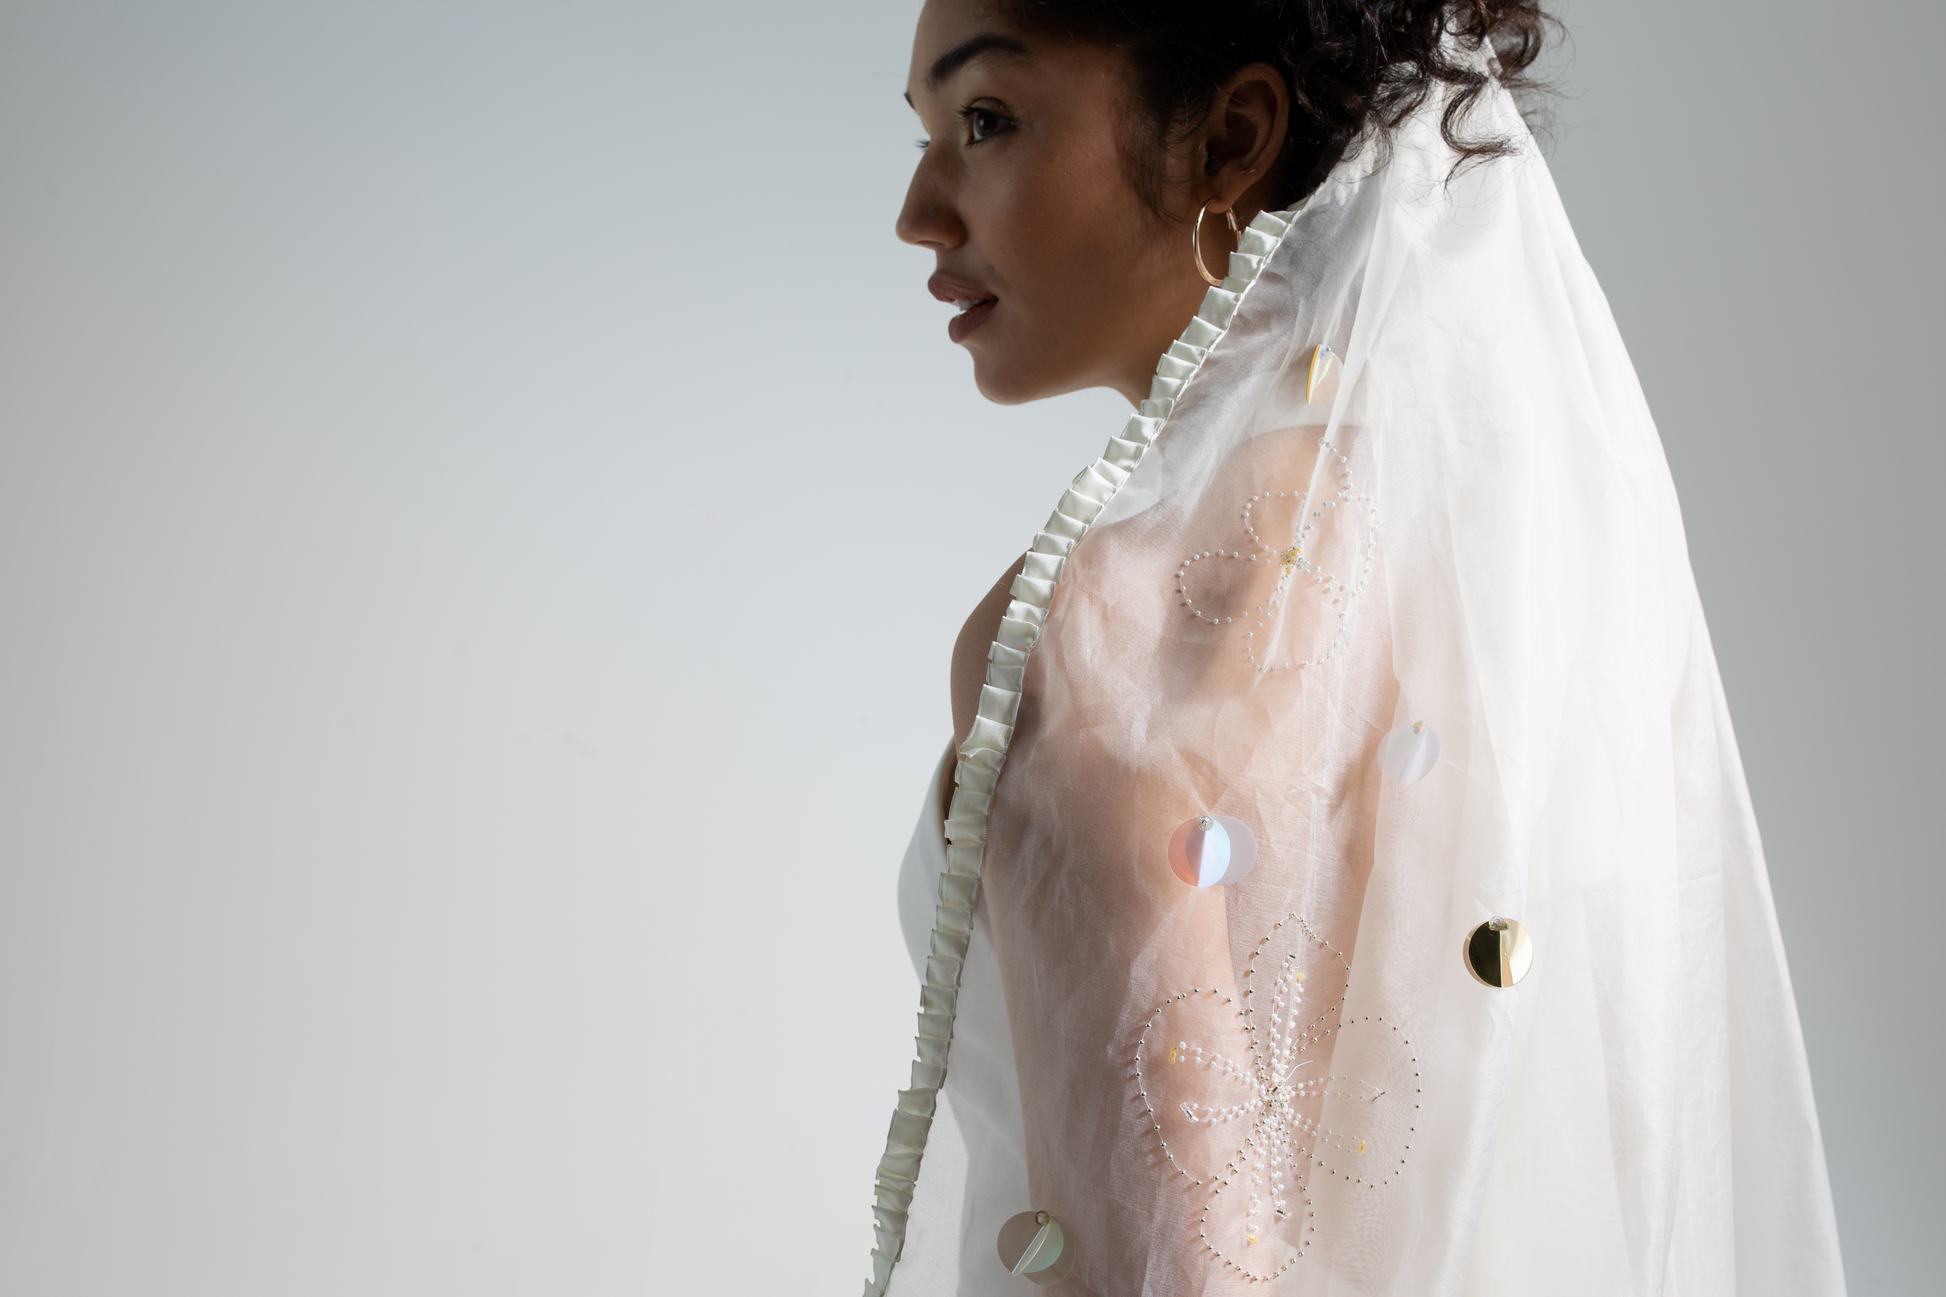 Silk organza embroidered veil, a highly decorative hand beaded floral embroidered veil from a collection of hand embellished, luxury bridal accessories, bridal headwear and veils.